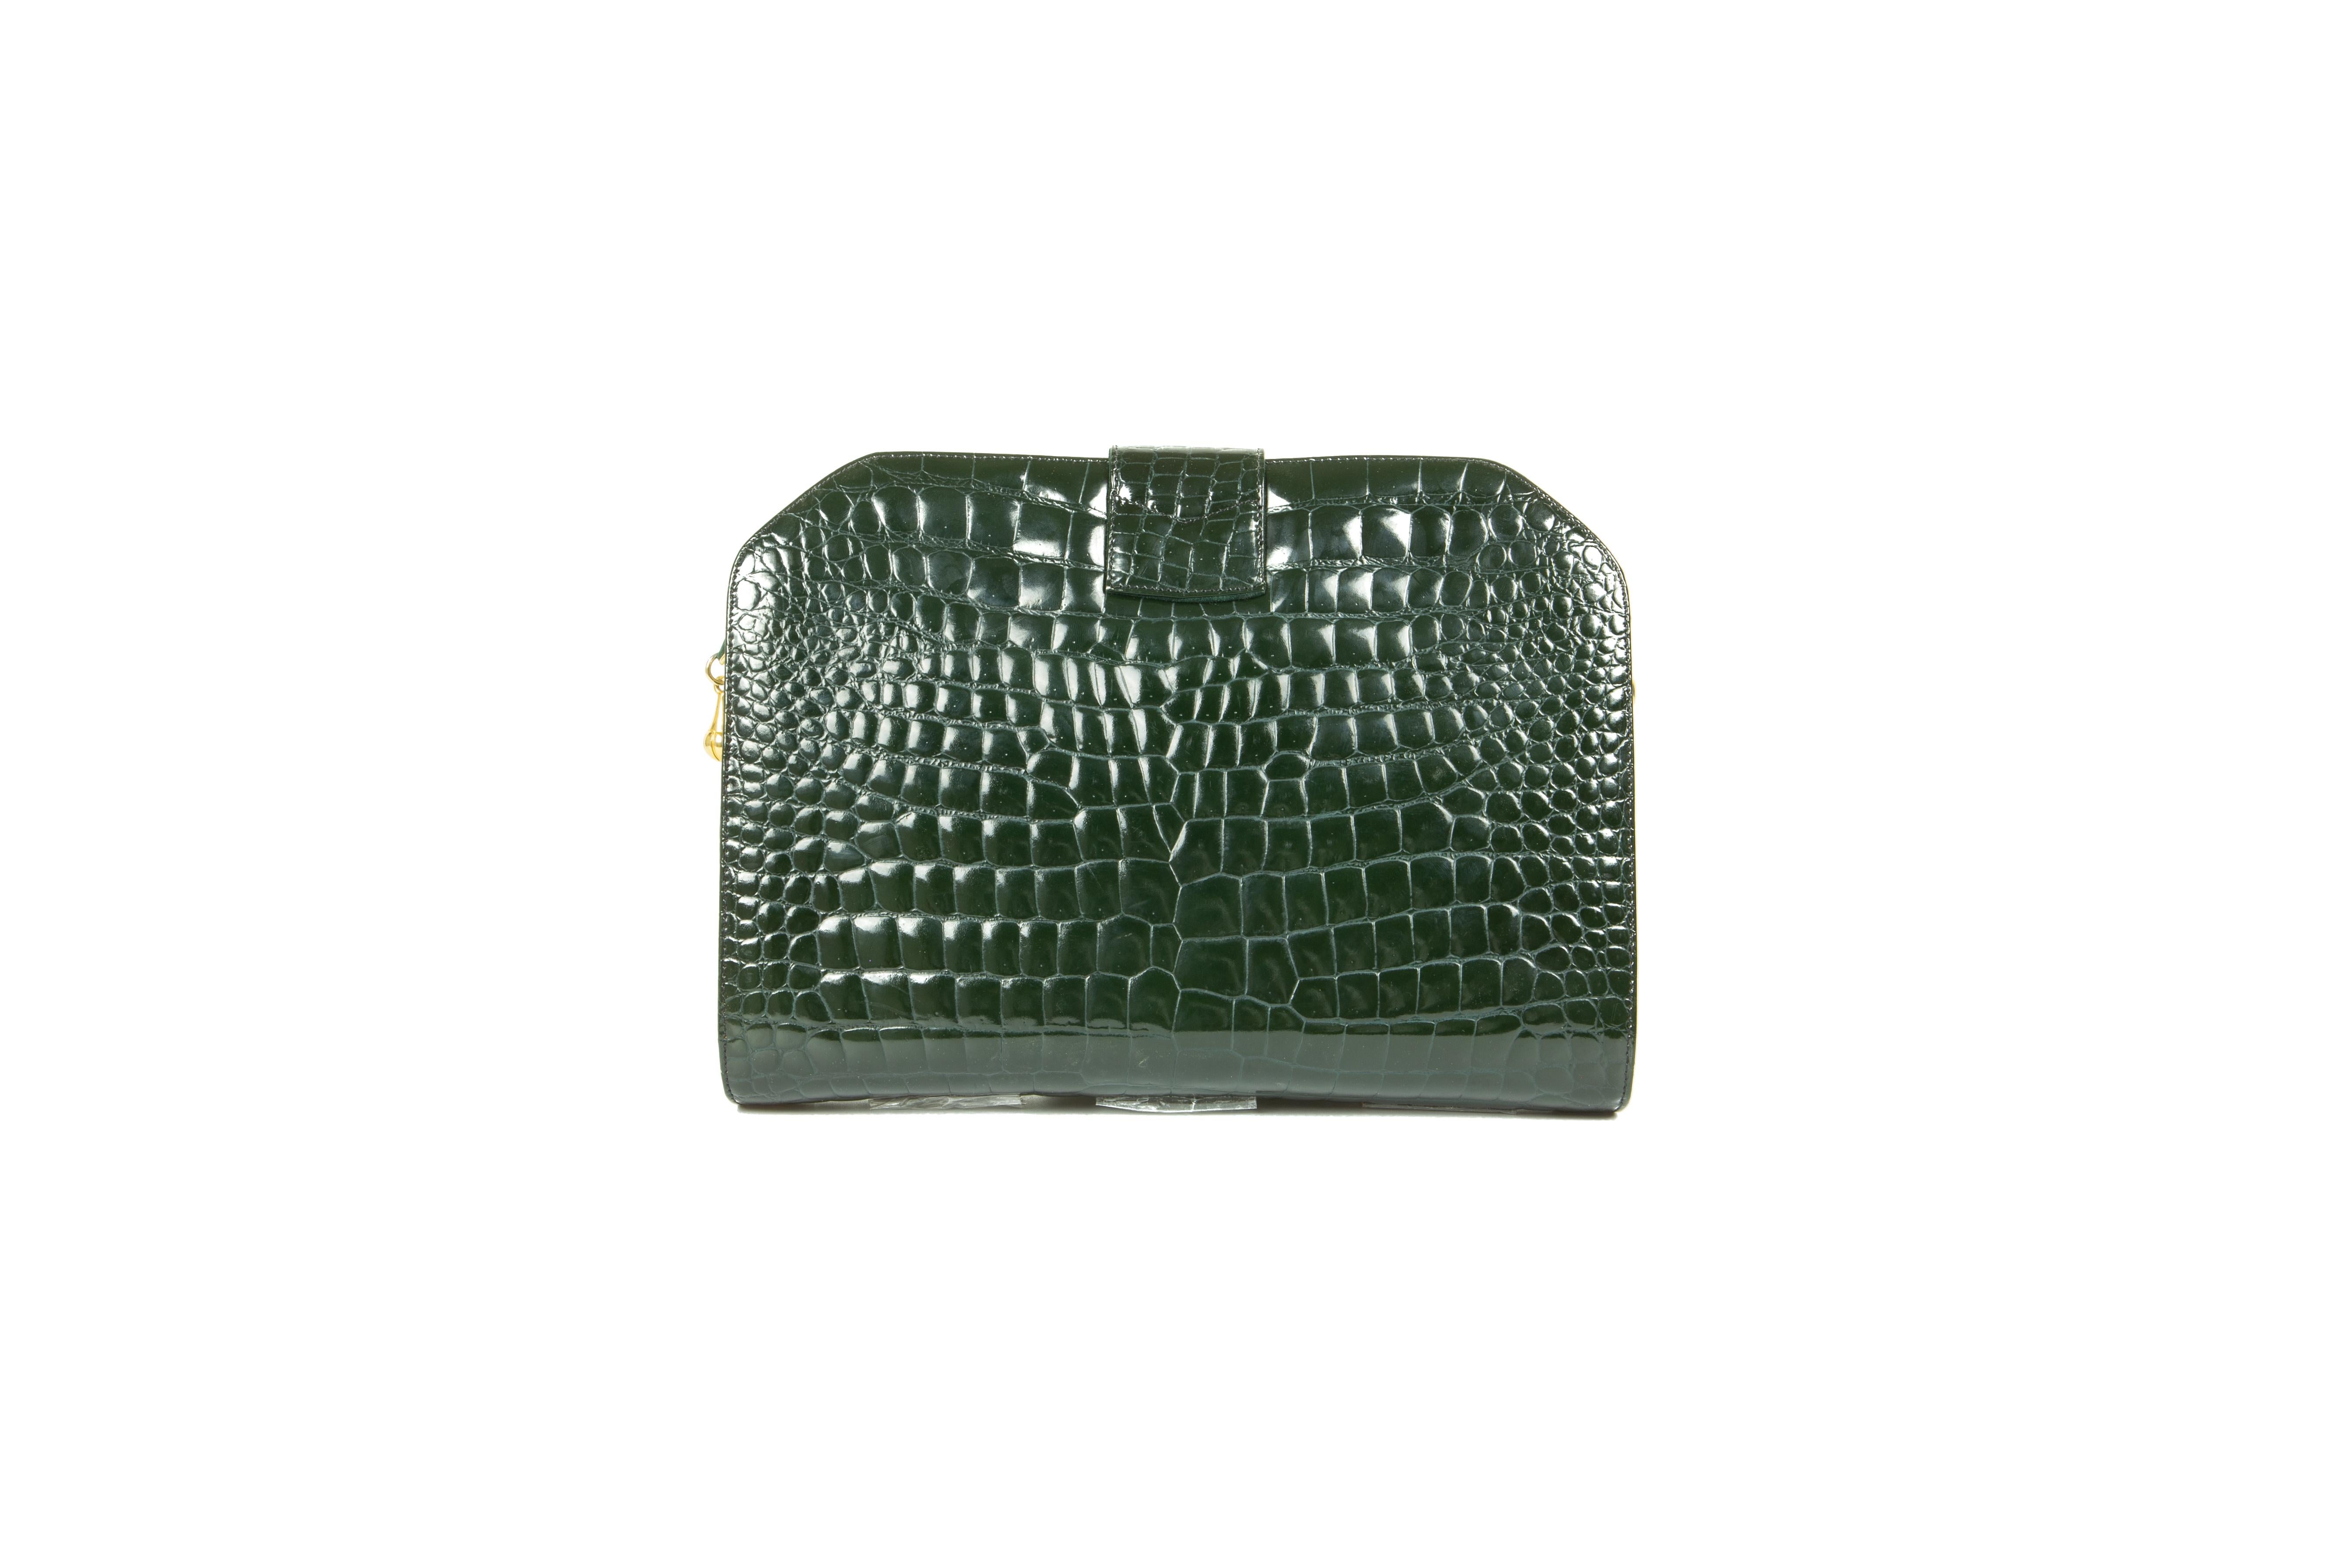 A rare early 1970s Louise Fontaine hunter-green porosus crocodile clutch/shoulder bag, comprising of one compartment with one gusseted zipper pocket, fully lined in black, suspended on an optional self strap - the reverse in forest-green leather -